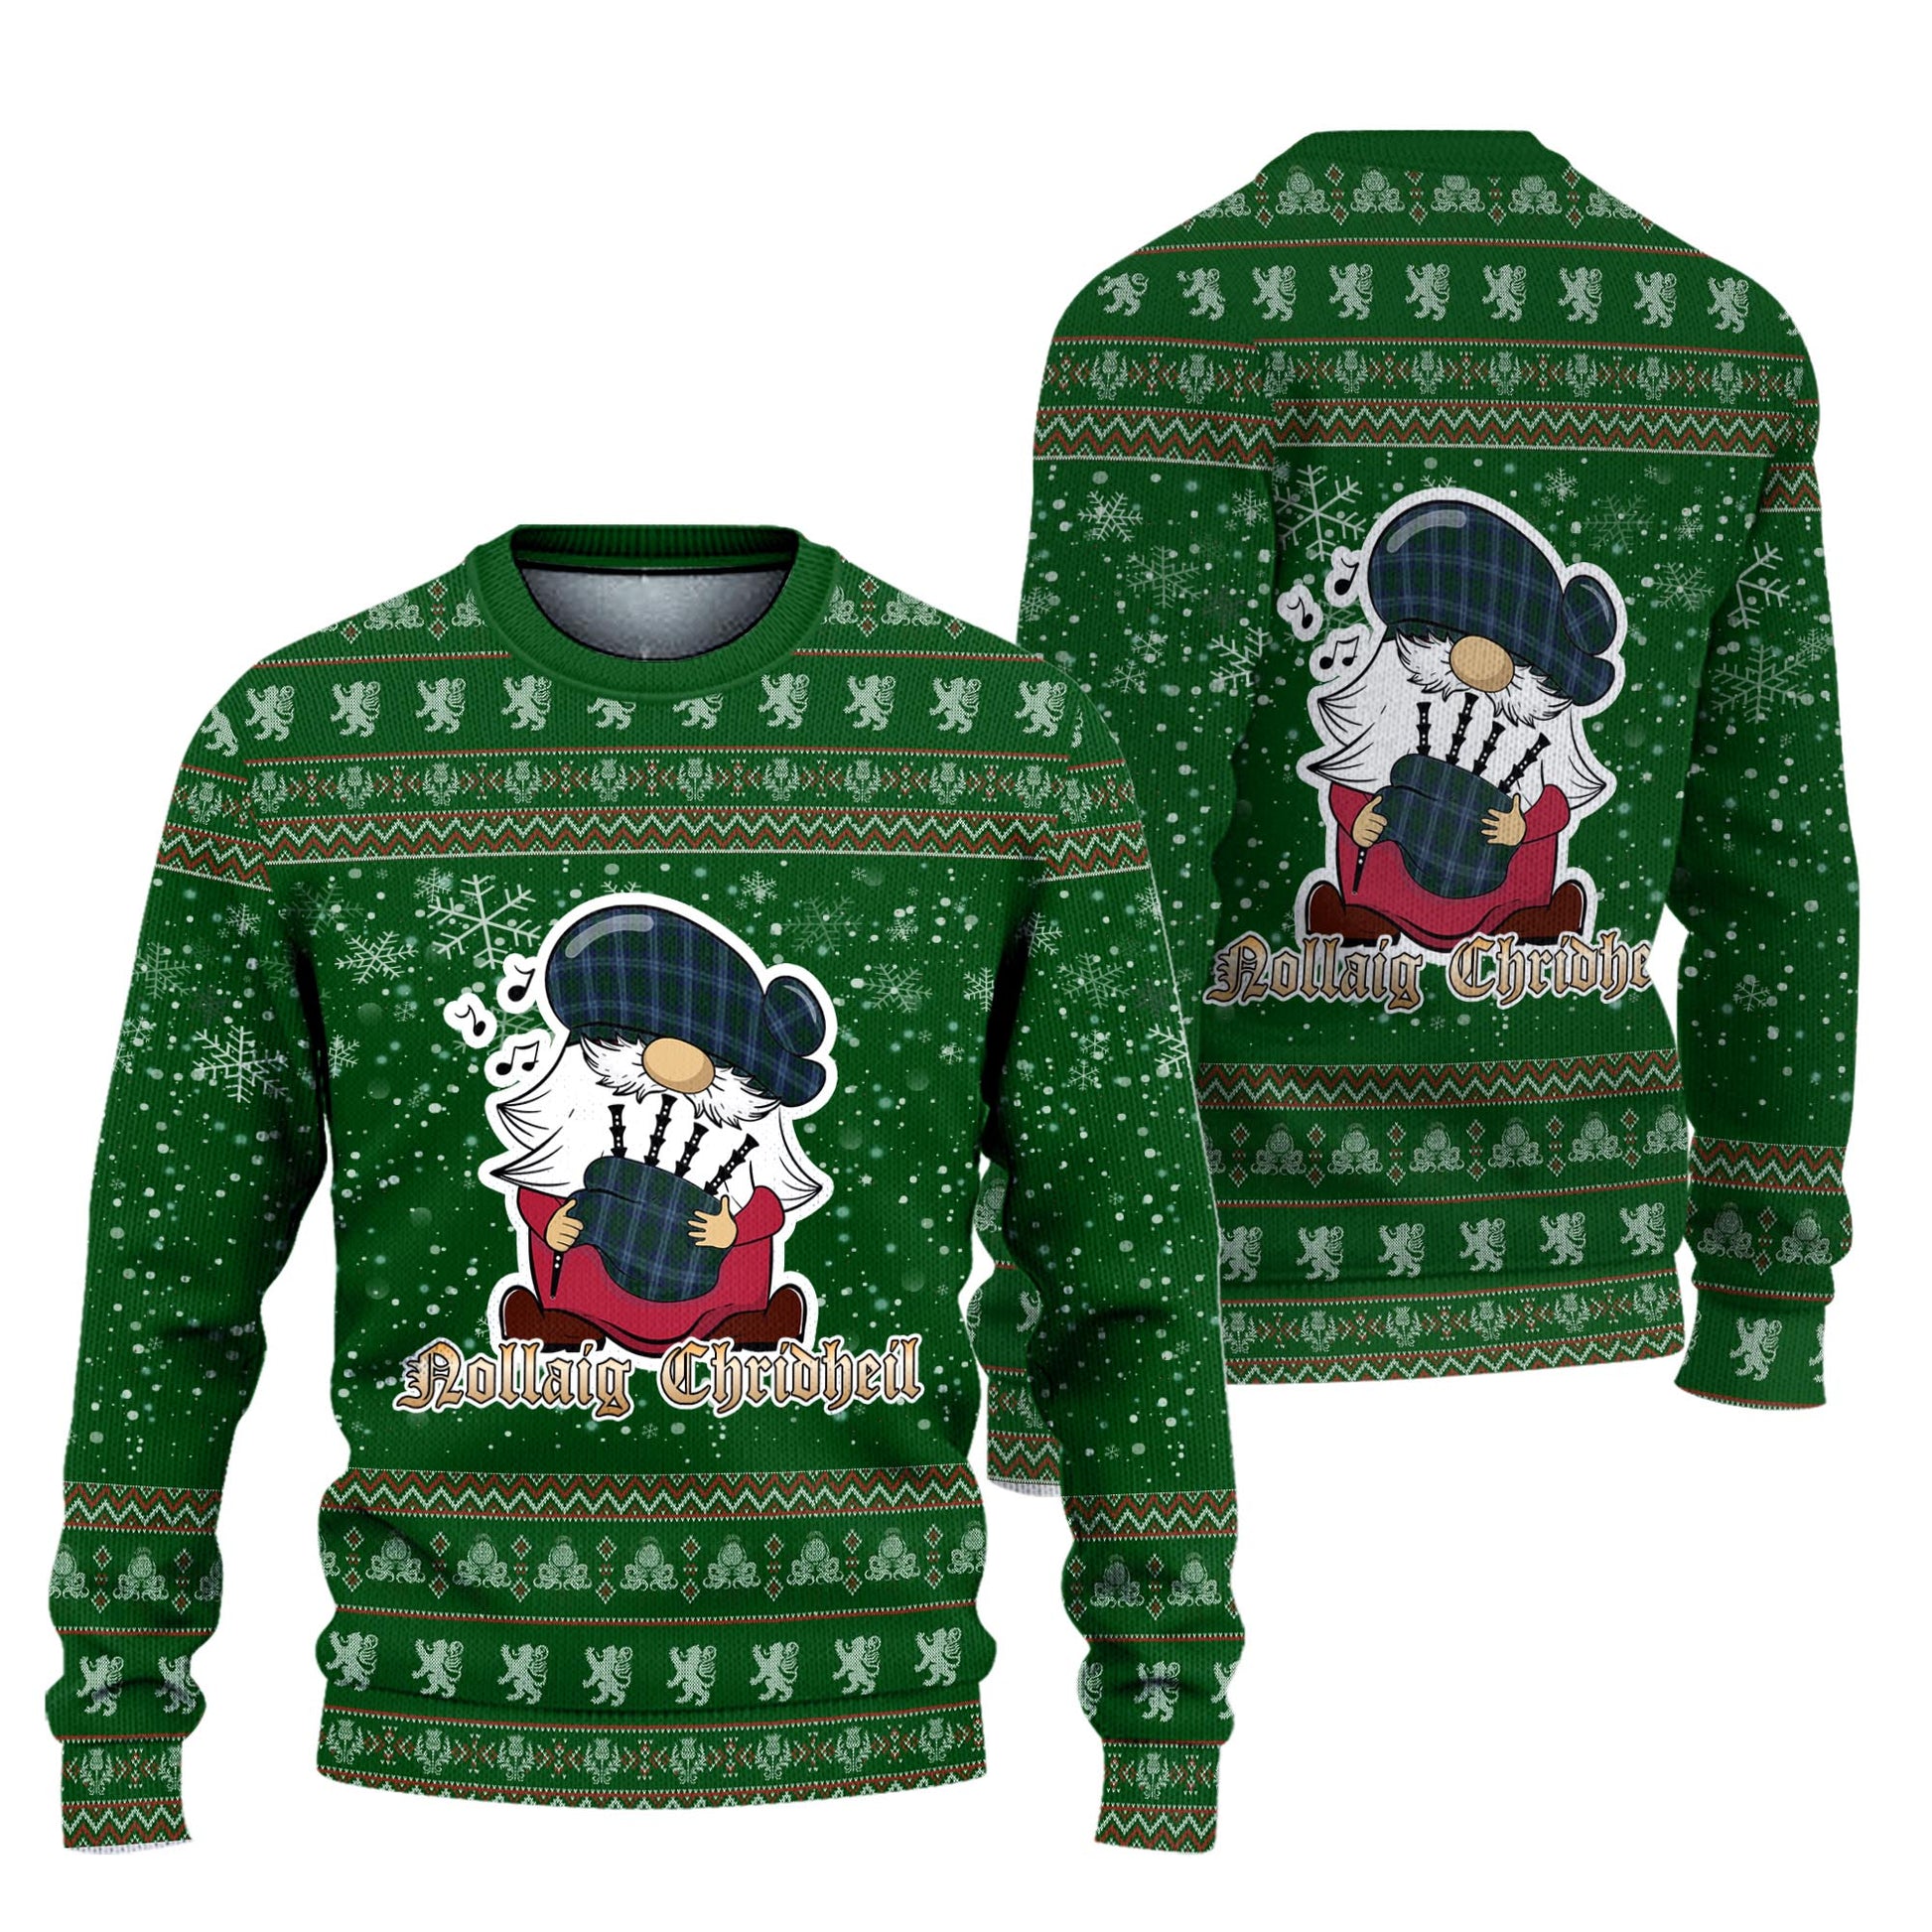 Jones of Wales Clan Christmas Family Knitted Sweater with Funny Gnome Playing Bagpipes Unisex Green - Tartanvibesclothing